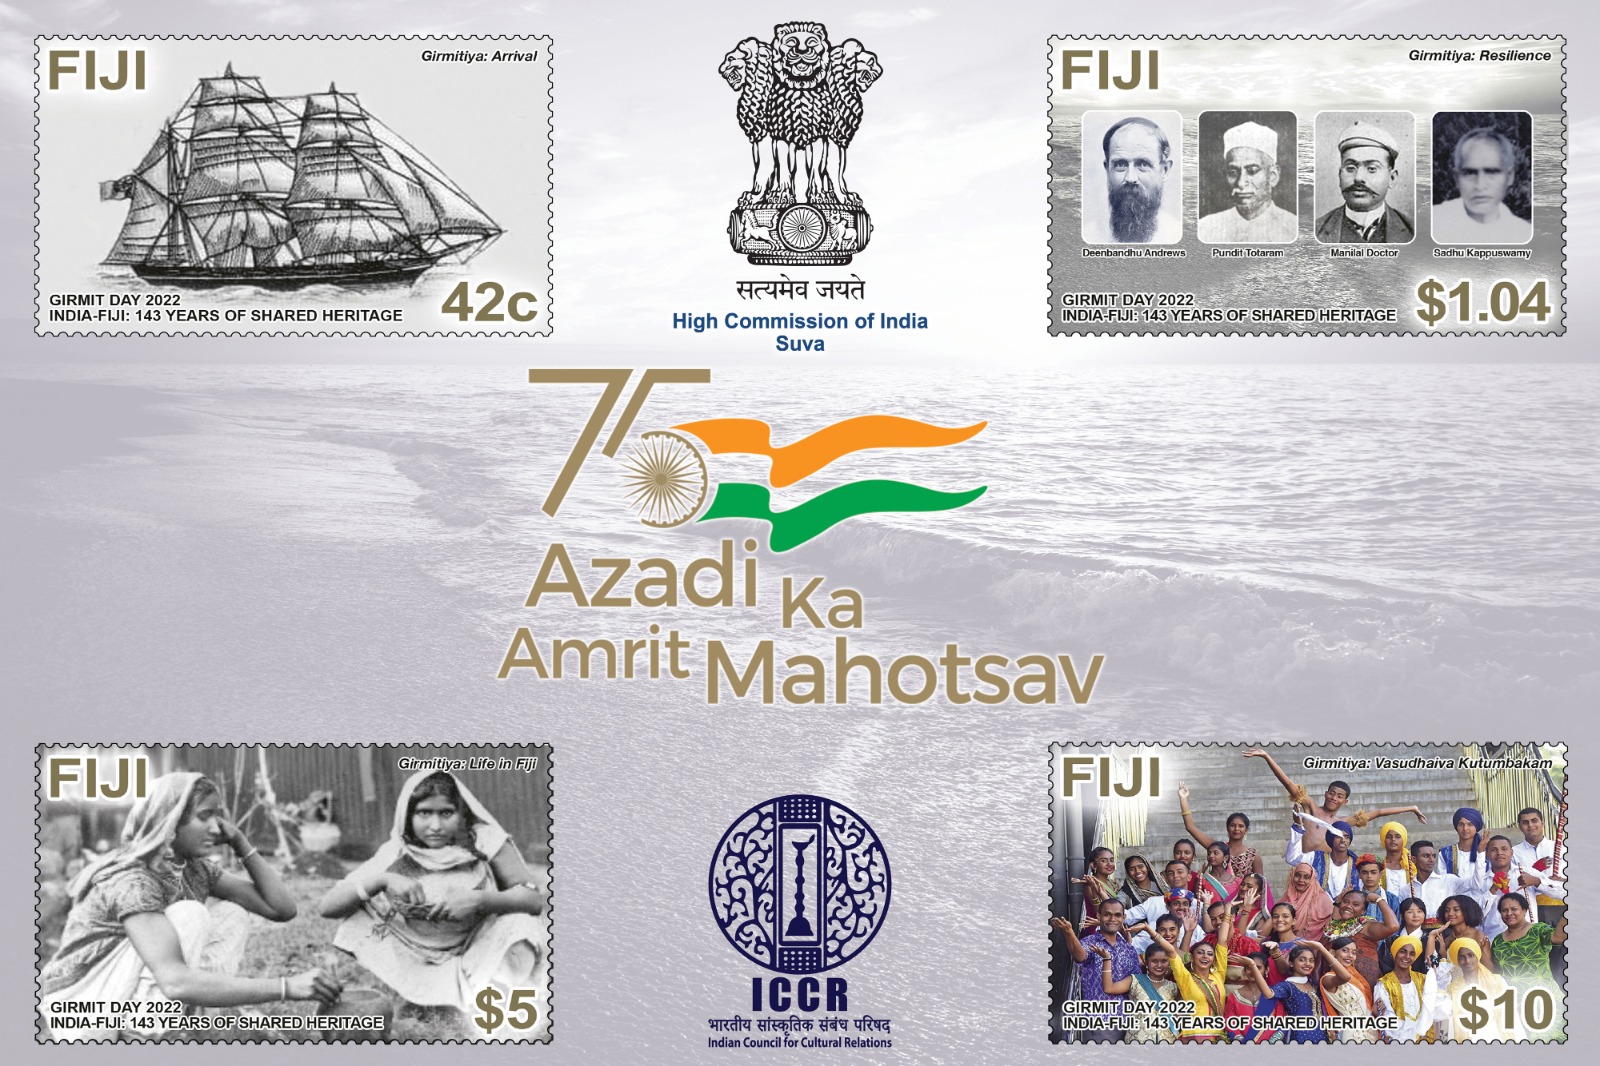 Release of Commemorative Stamps on Girmit Day 2022